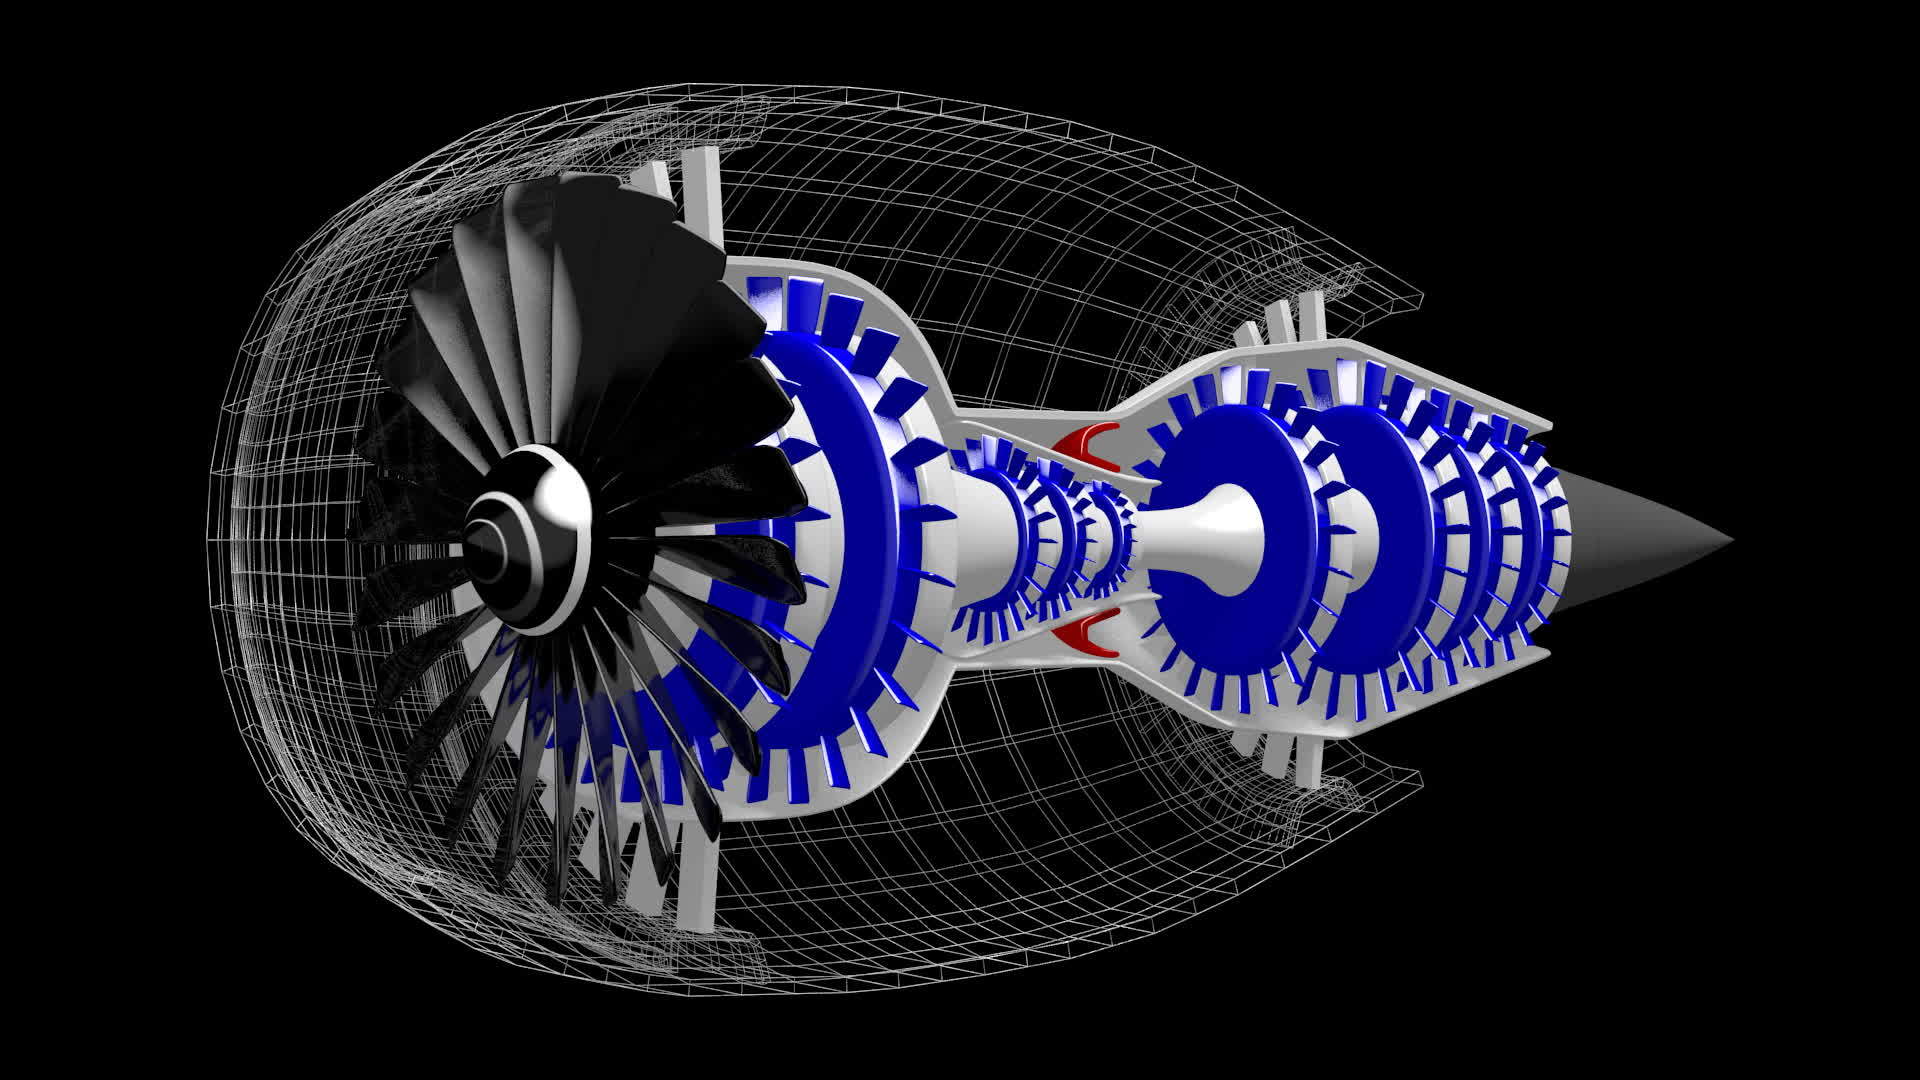 Working Jet Engine with Rotating Blades - 3D Wireframe Model on Black  Background 18976423 Stock Video at Vecteezy